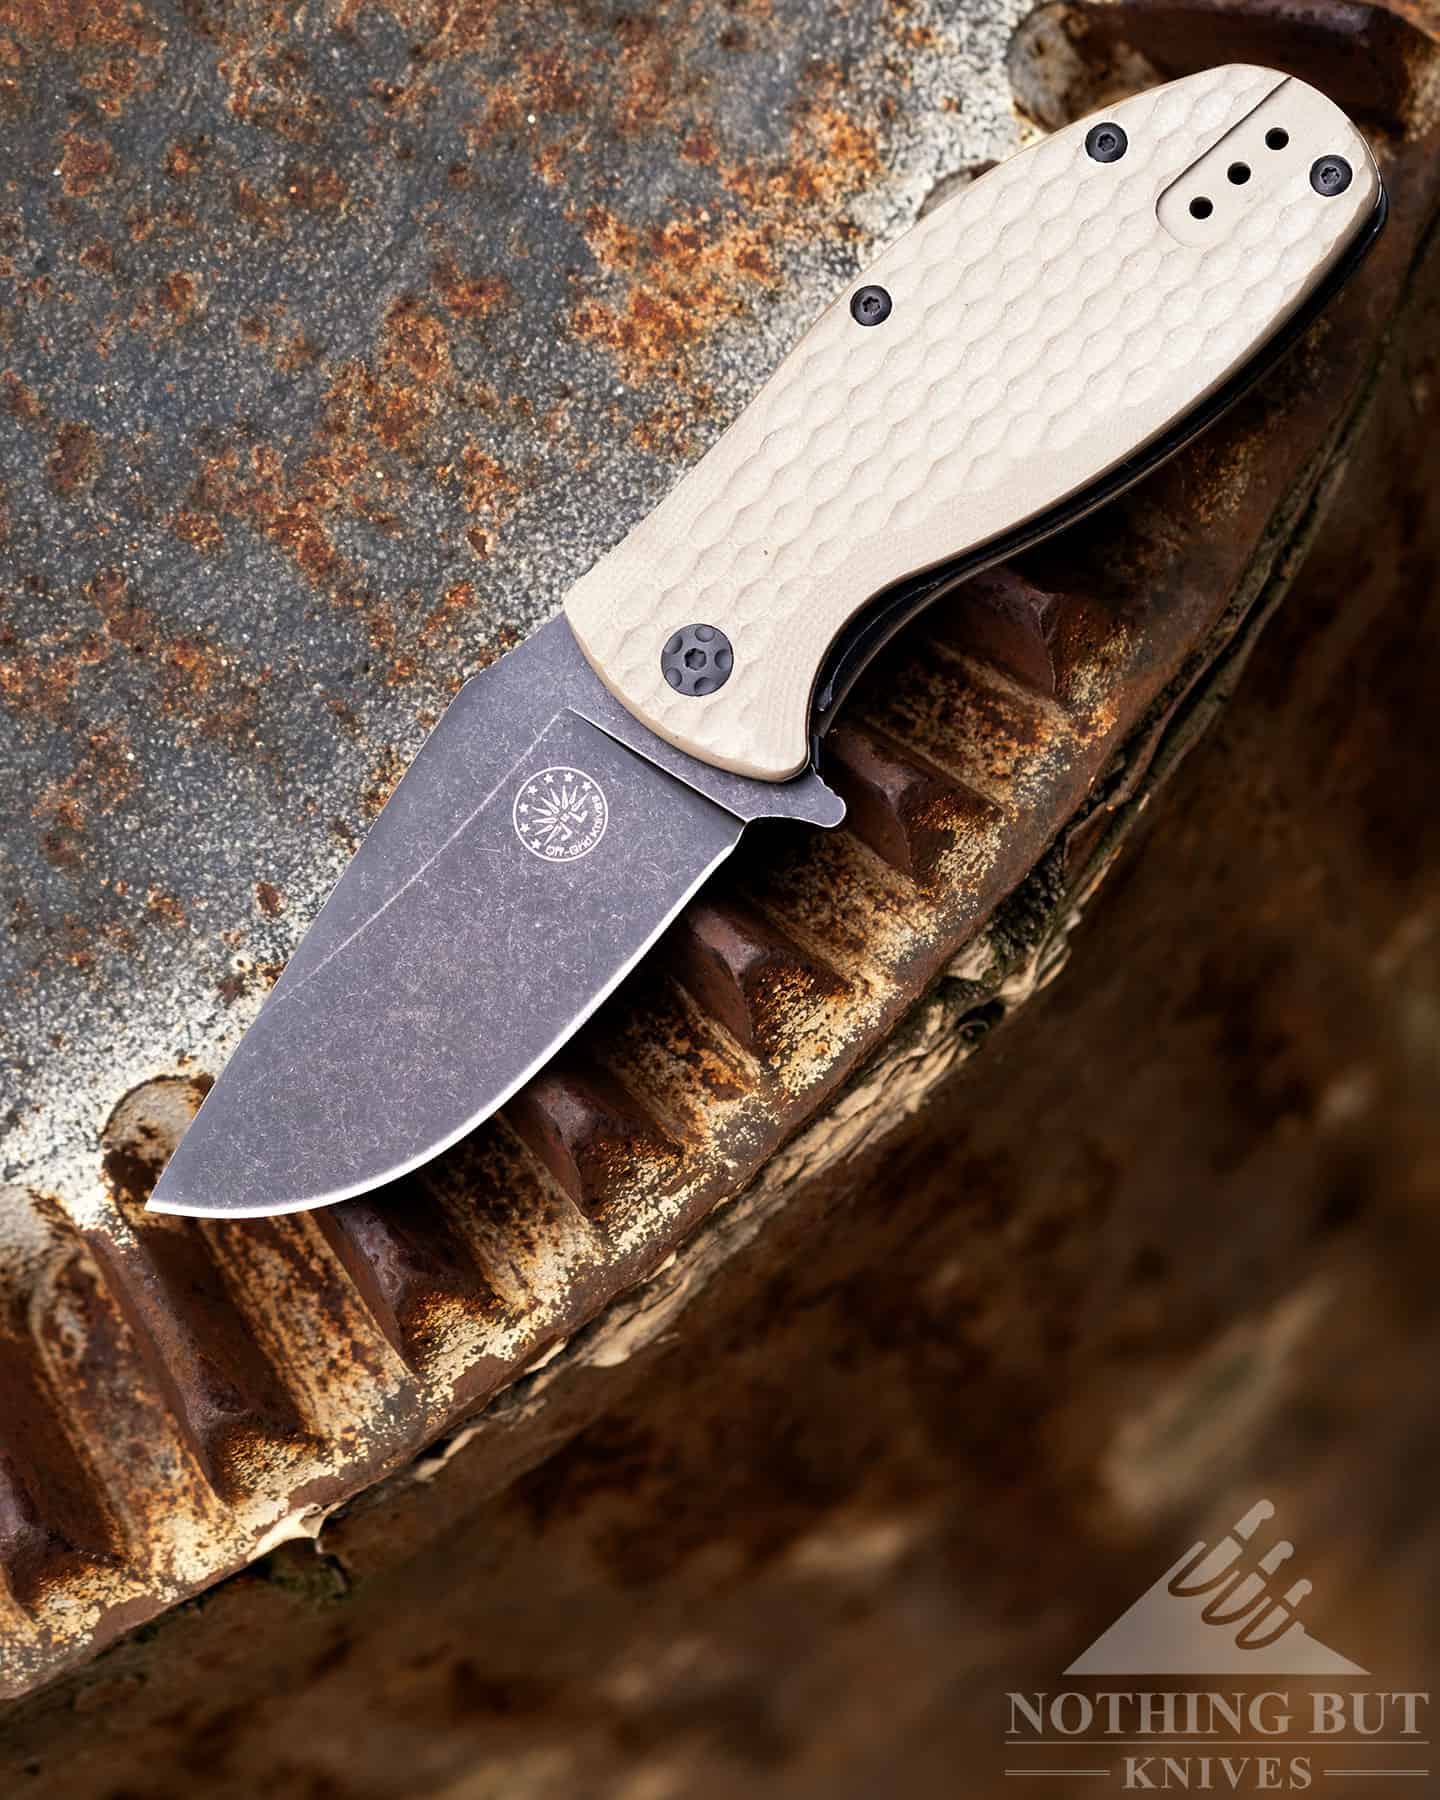 We have subjected our Off-Grid Badger pocket knives to all sorts of hard use situtions that resulted in them getting dirty and scuff, but they keep on working. 